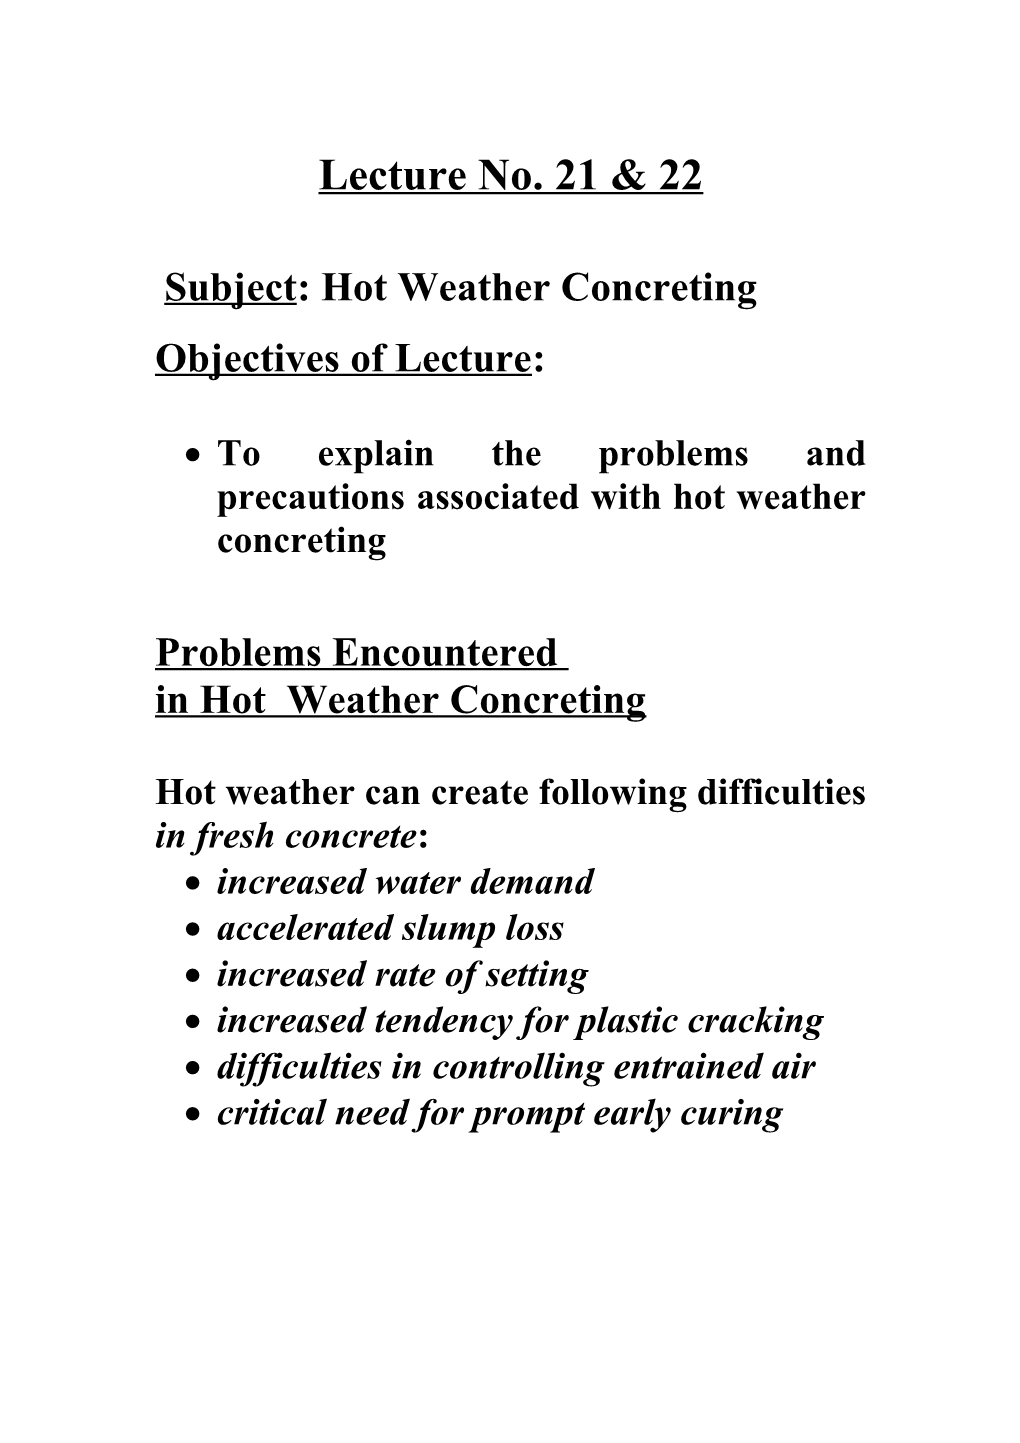 Subject: Hot Weather Concreting